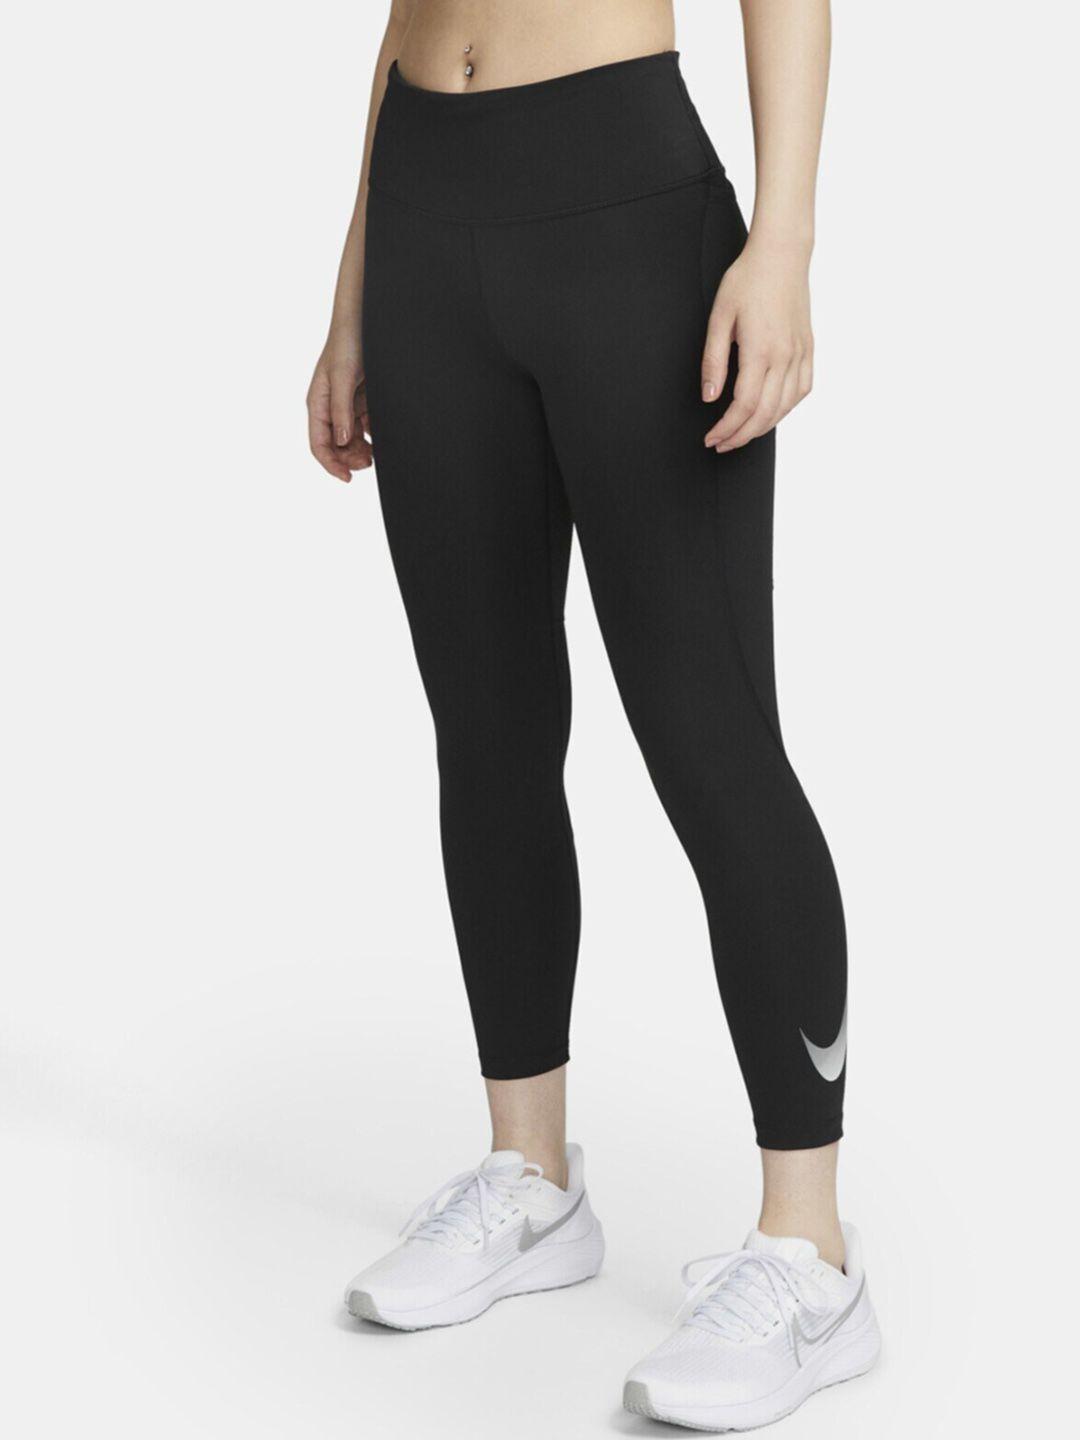 nike-women-fast-mid-rise-7/8-running-tights-with-pockets